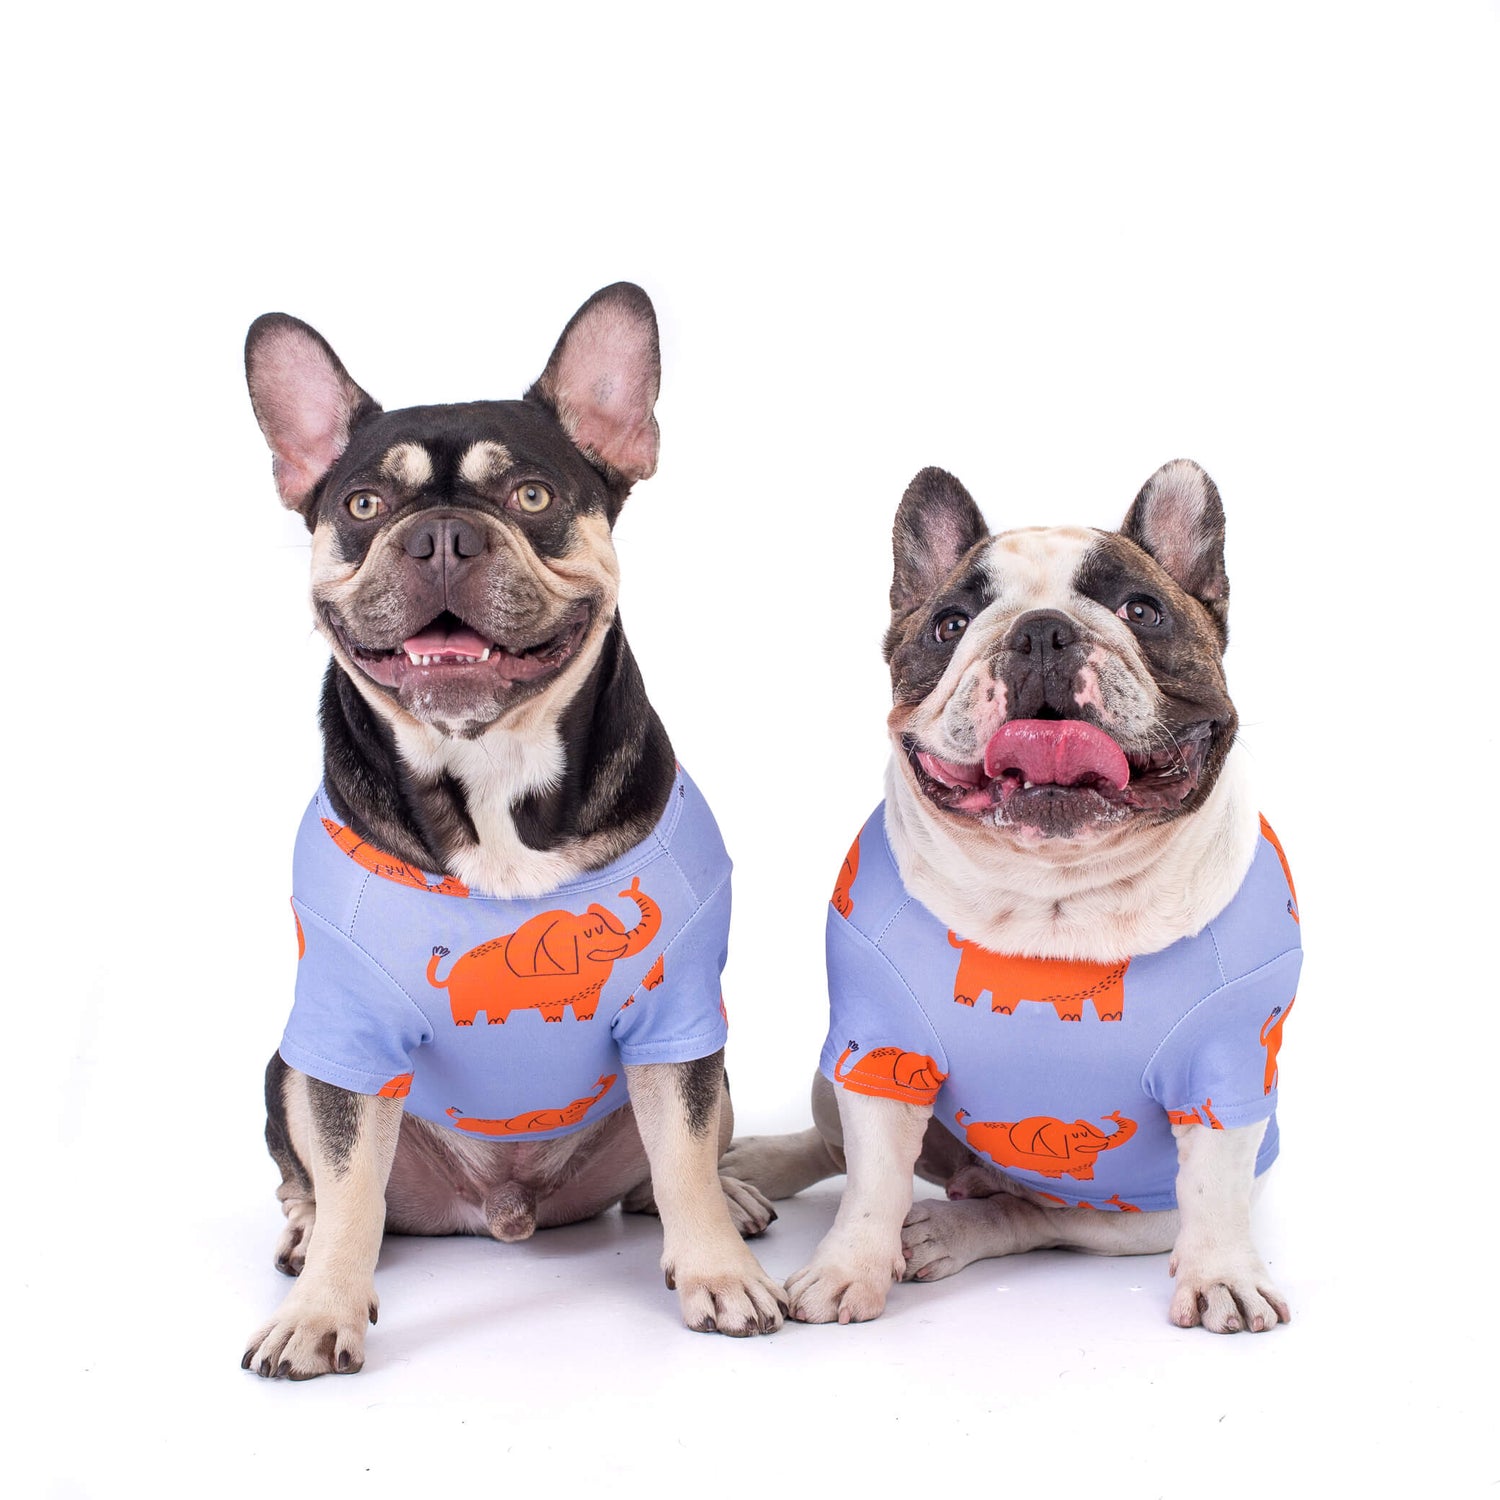 One chocolate and tan and one Brindle pied French Bulldog wearing a lilac coloured shirt with bright orange elephants printed on it.